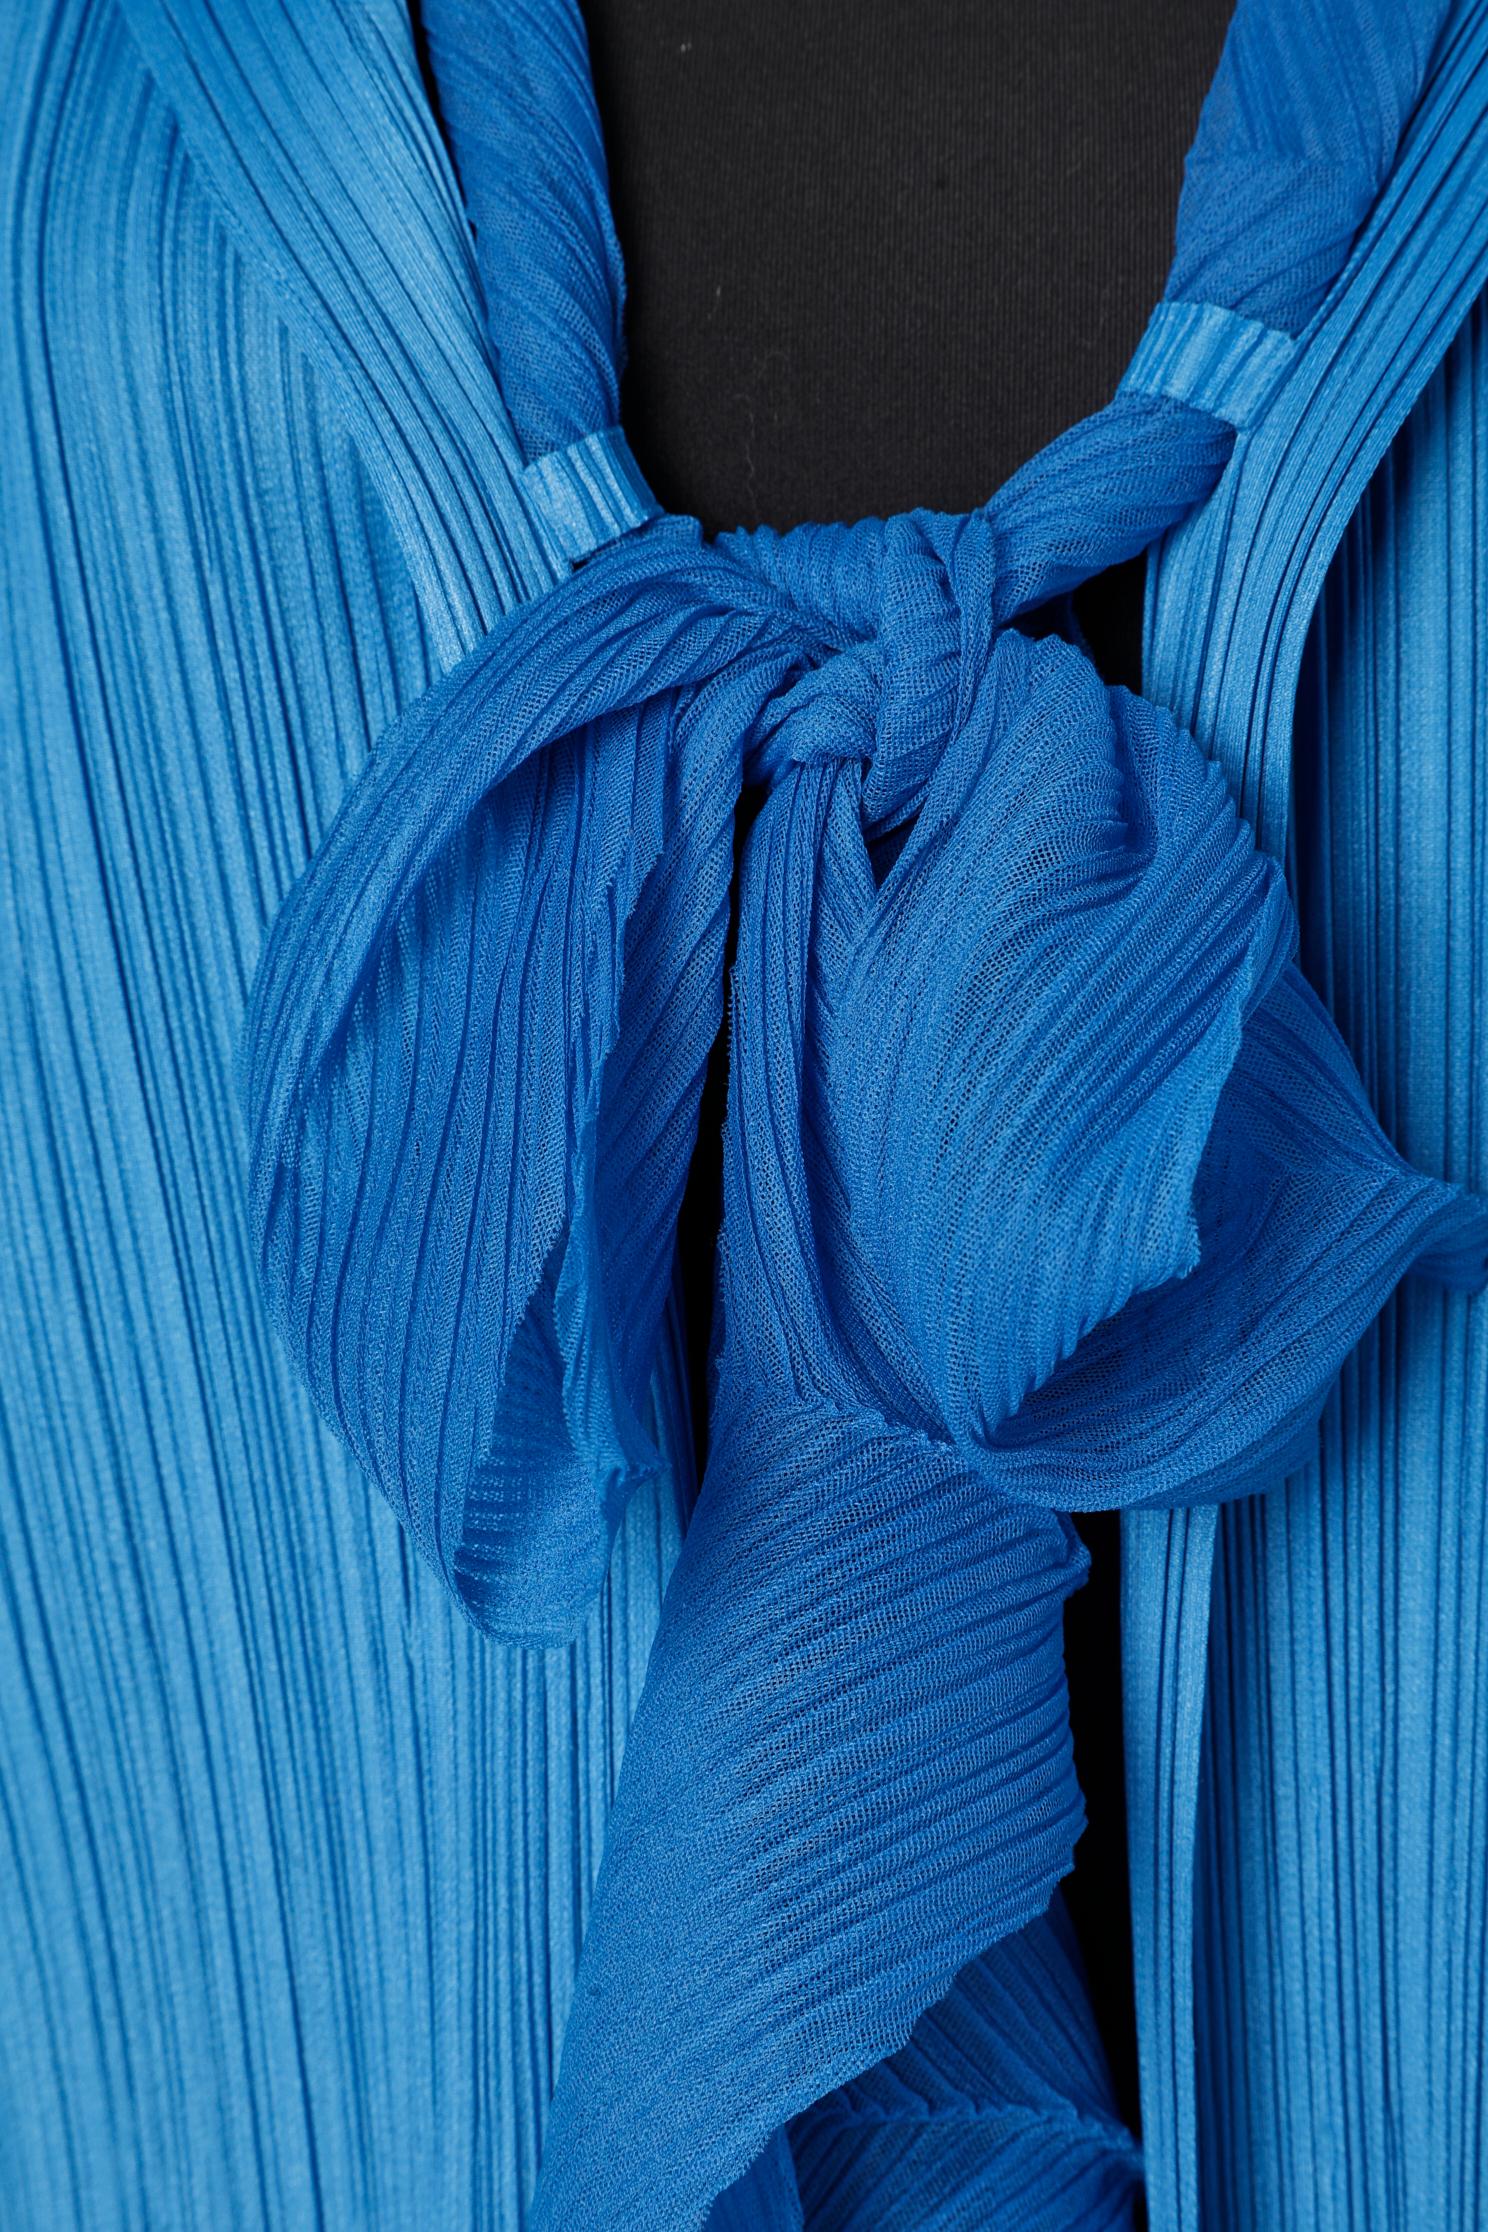 Blue pleated shirt with attached scarf Issey Miyake Pleats Please  For Sale 1